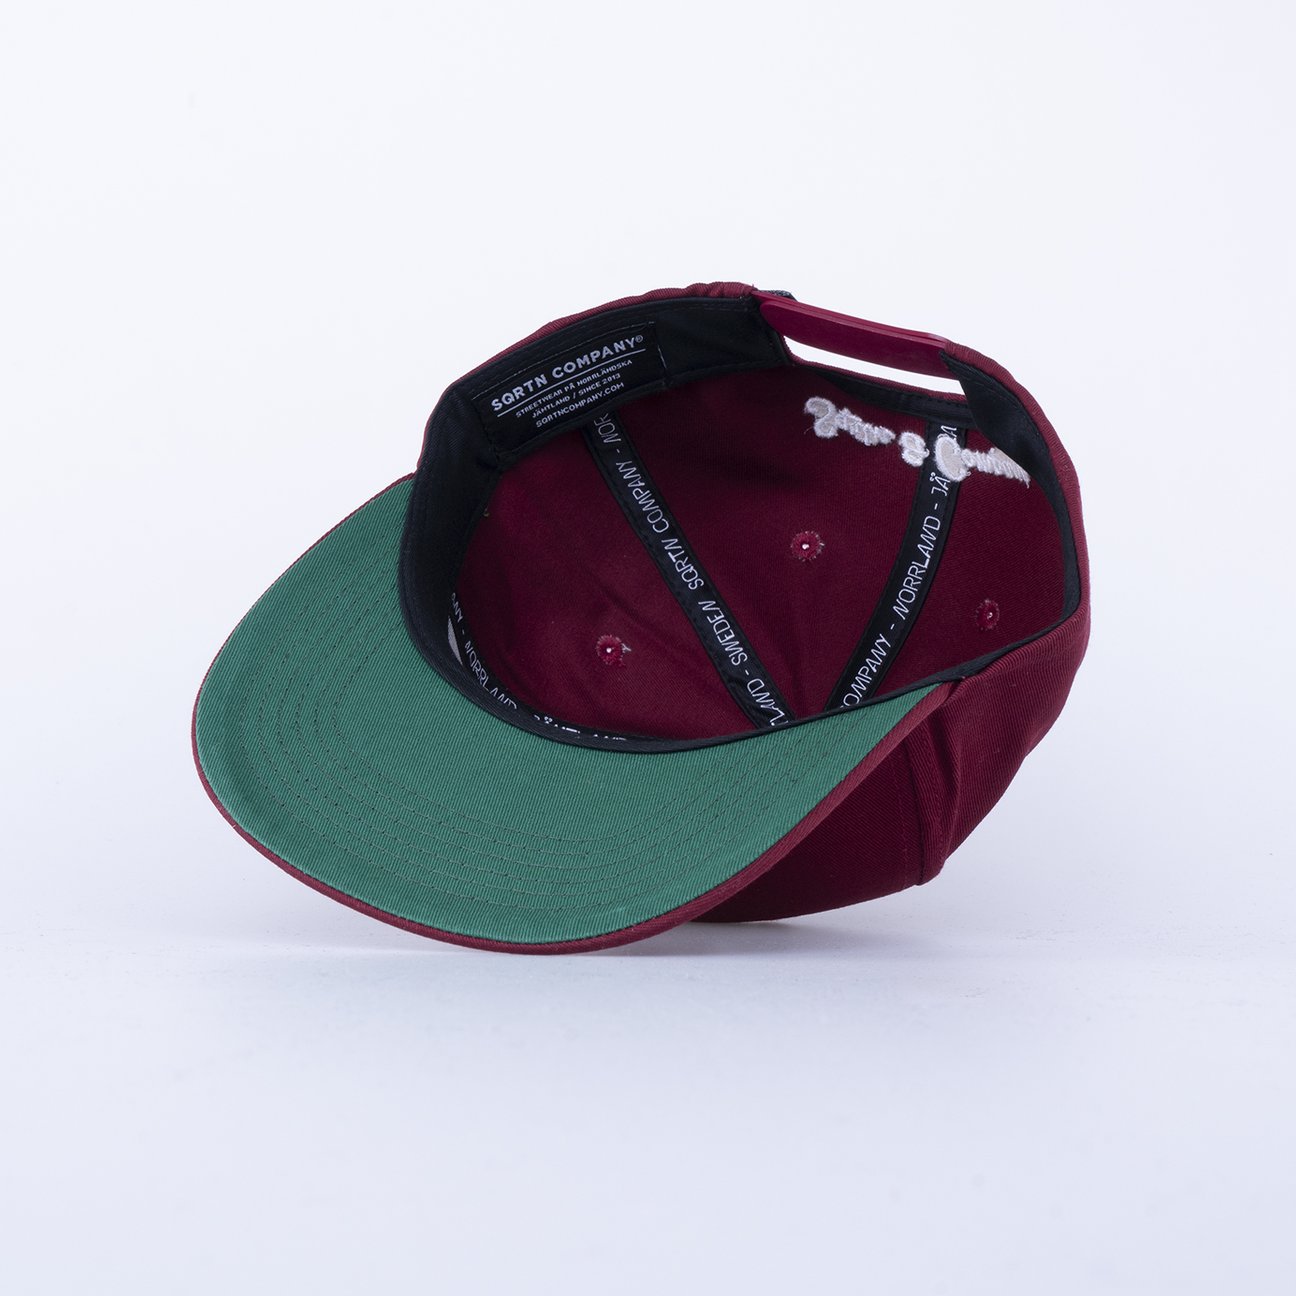 GREAT NORRLAND KEPS - MAROON